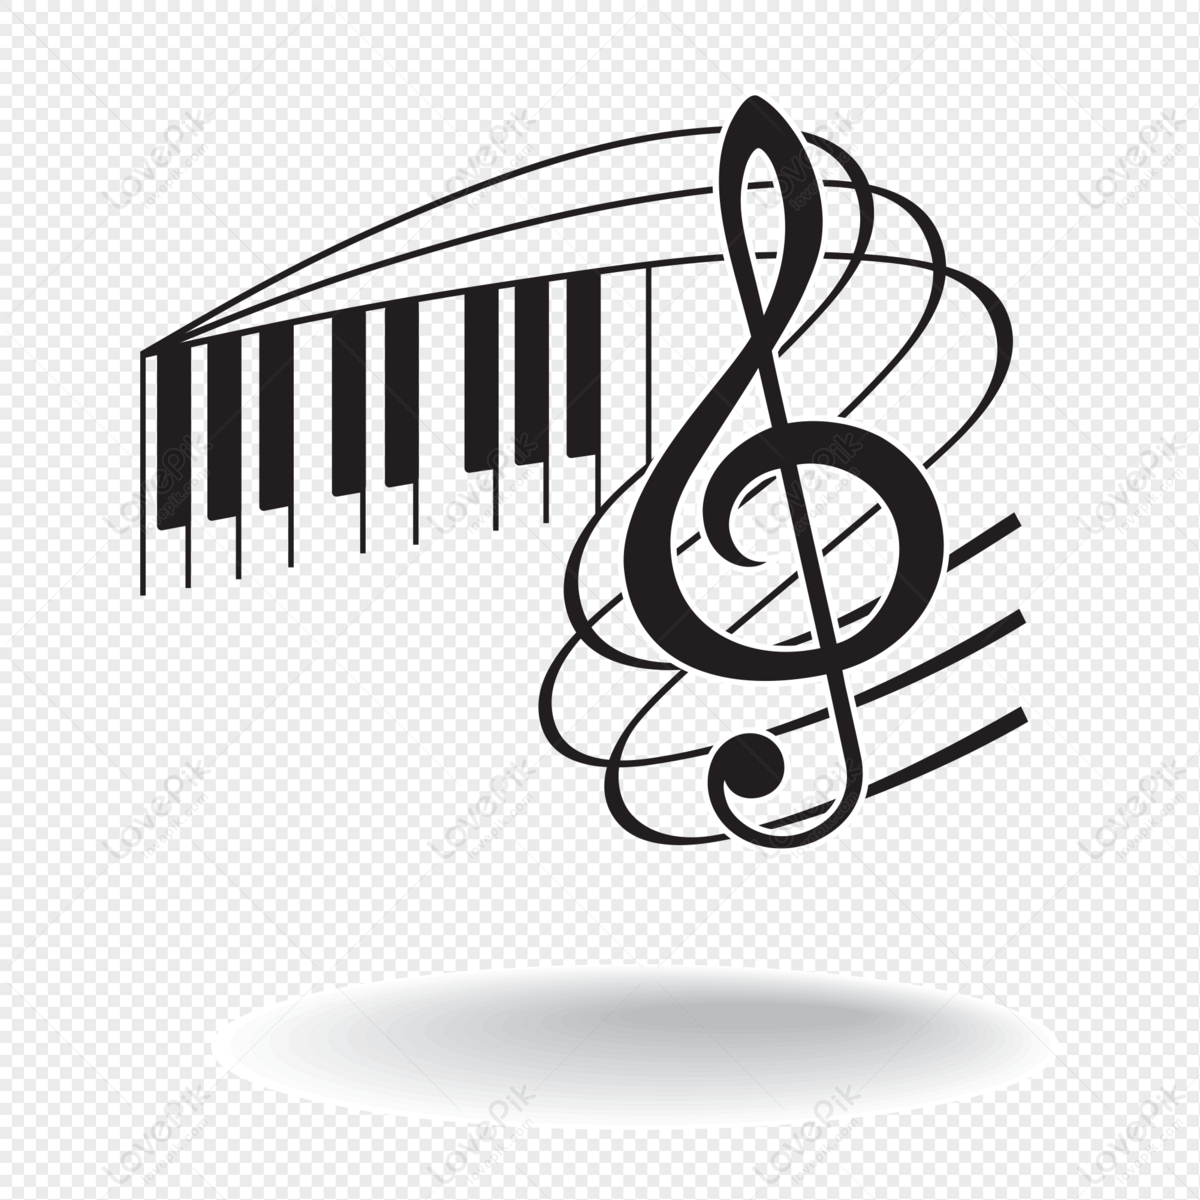 Piano Music Symbol PNG White Transparent And Clipart Image For ...